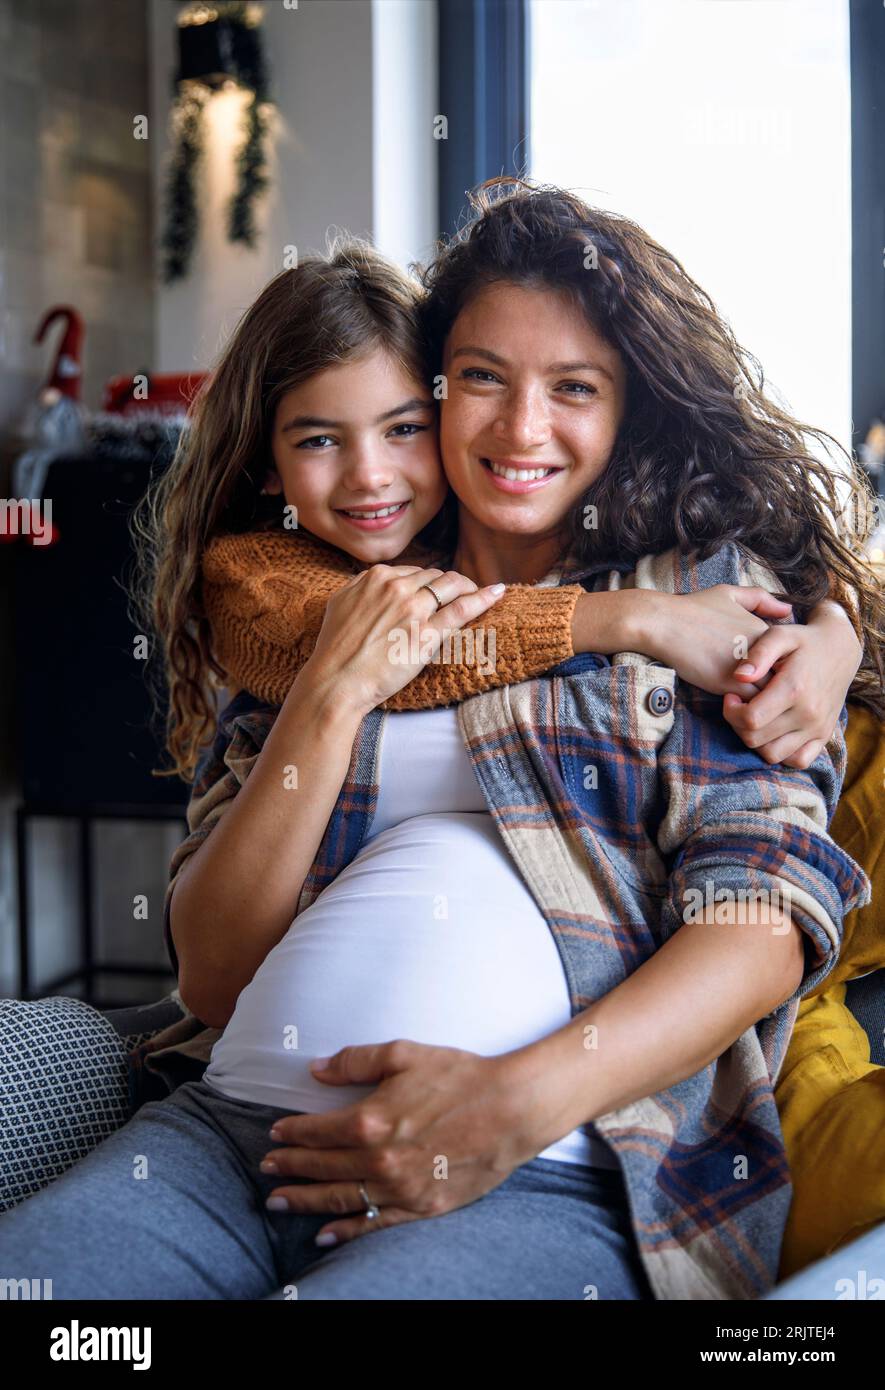 Happy daughter embracing expectant mother at home Stock Photo